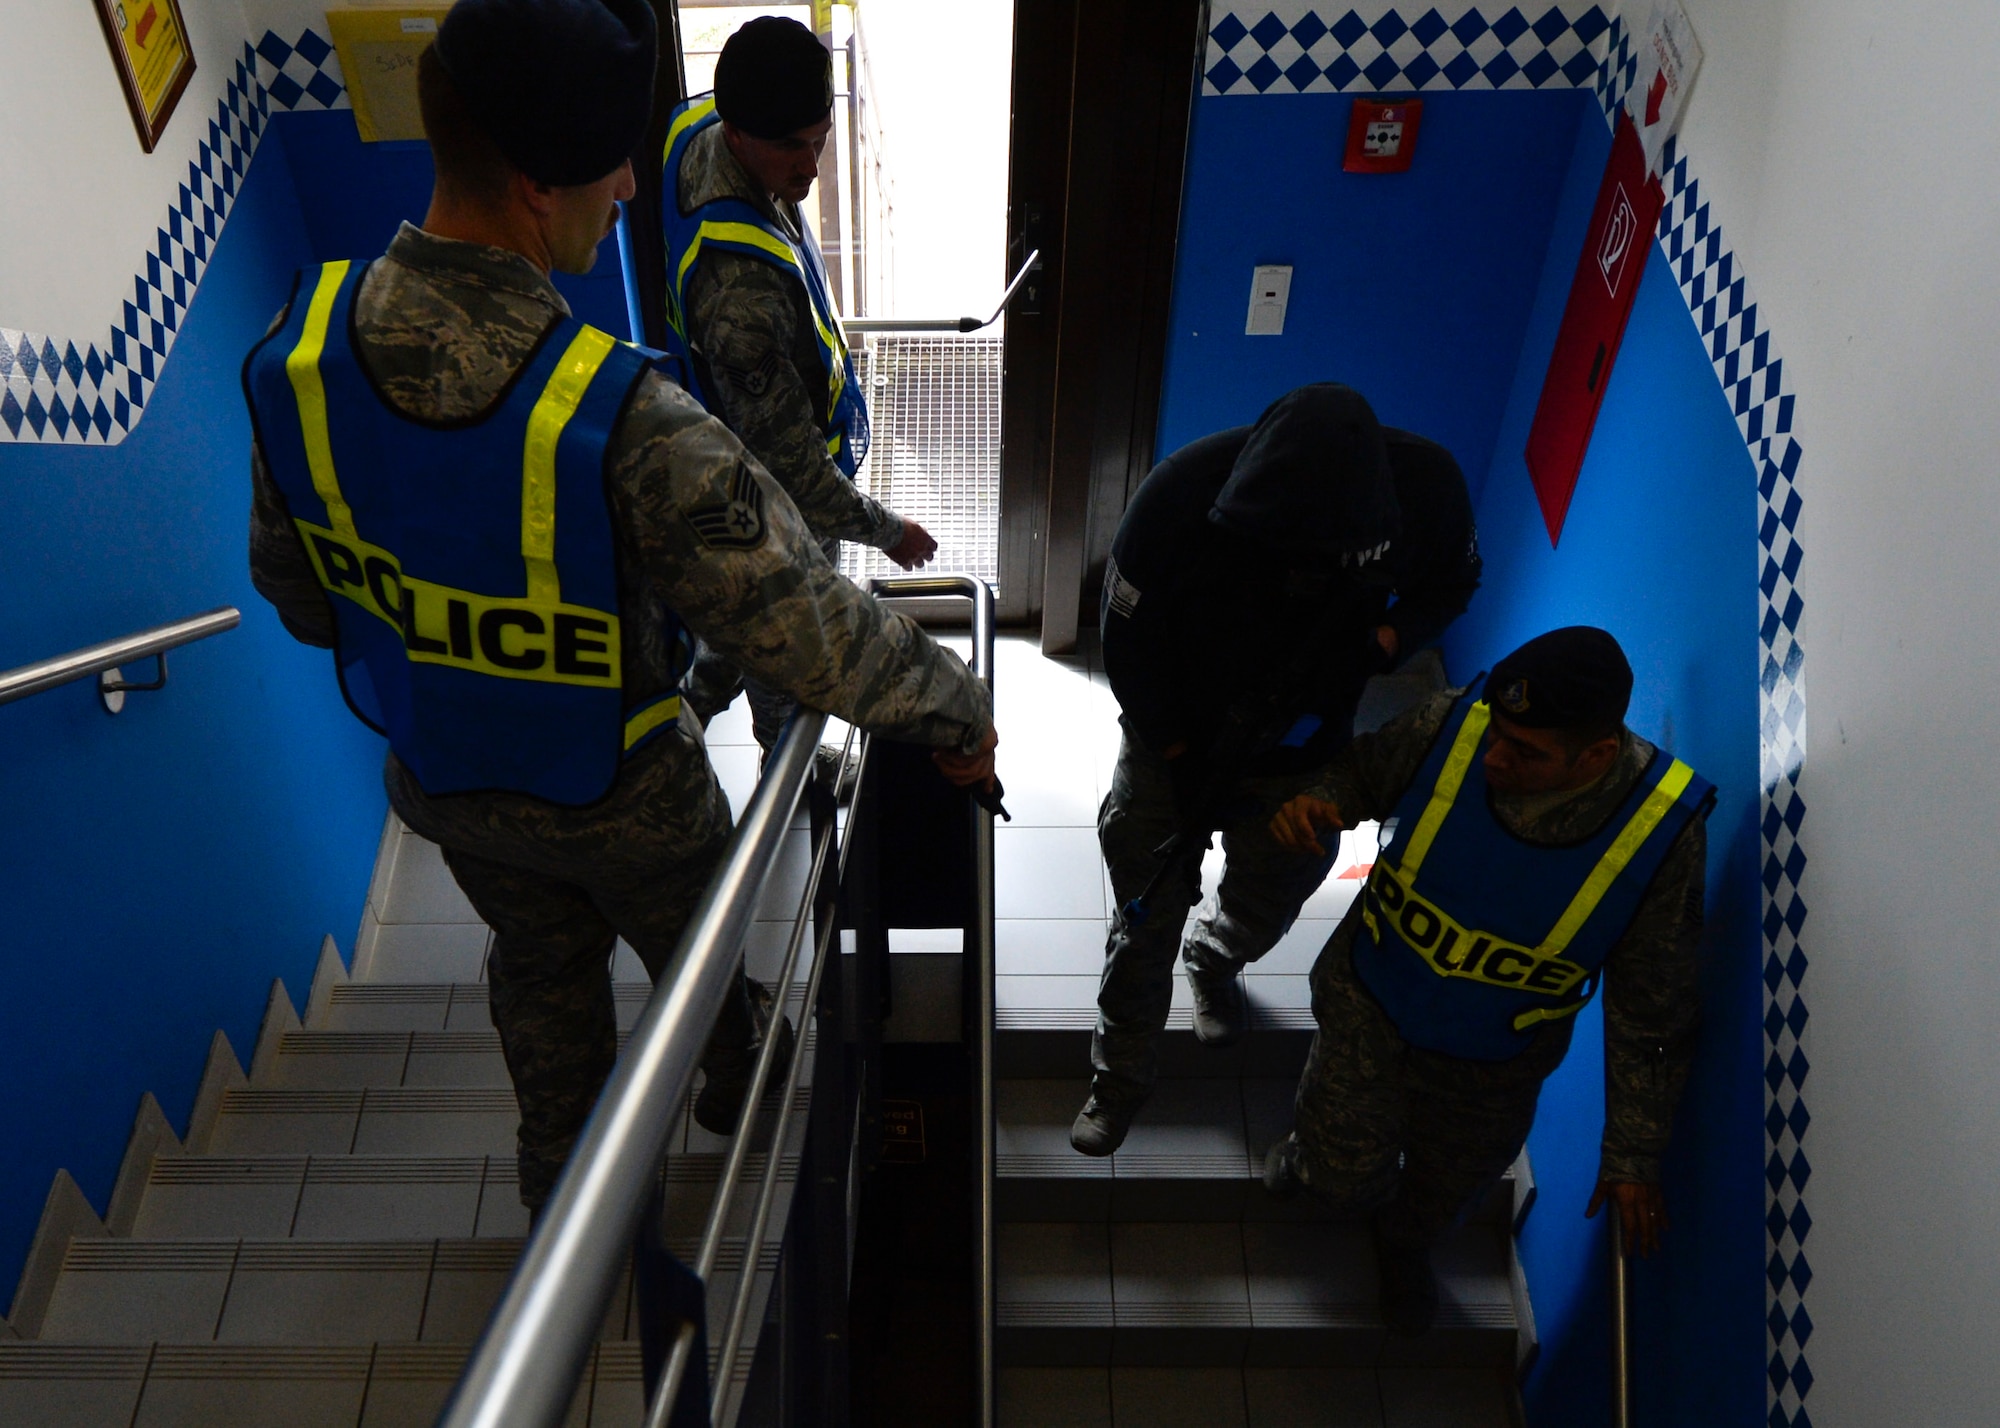 Airmen from the 86th Security Forces Squadron prepare during an active shooter readiness training at the 86th Maintenance Group on Ramstein Air Base, Germany, July 12, 2017.  Approximately 15 key players worked directly with the 86th MXG readiness and training cell facilitate the exercise and ensure safety. (U.S. Air Force photo by Staff Sgt. Nesha Humes)